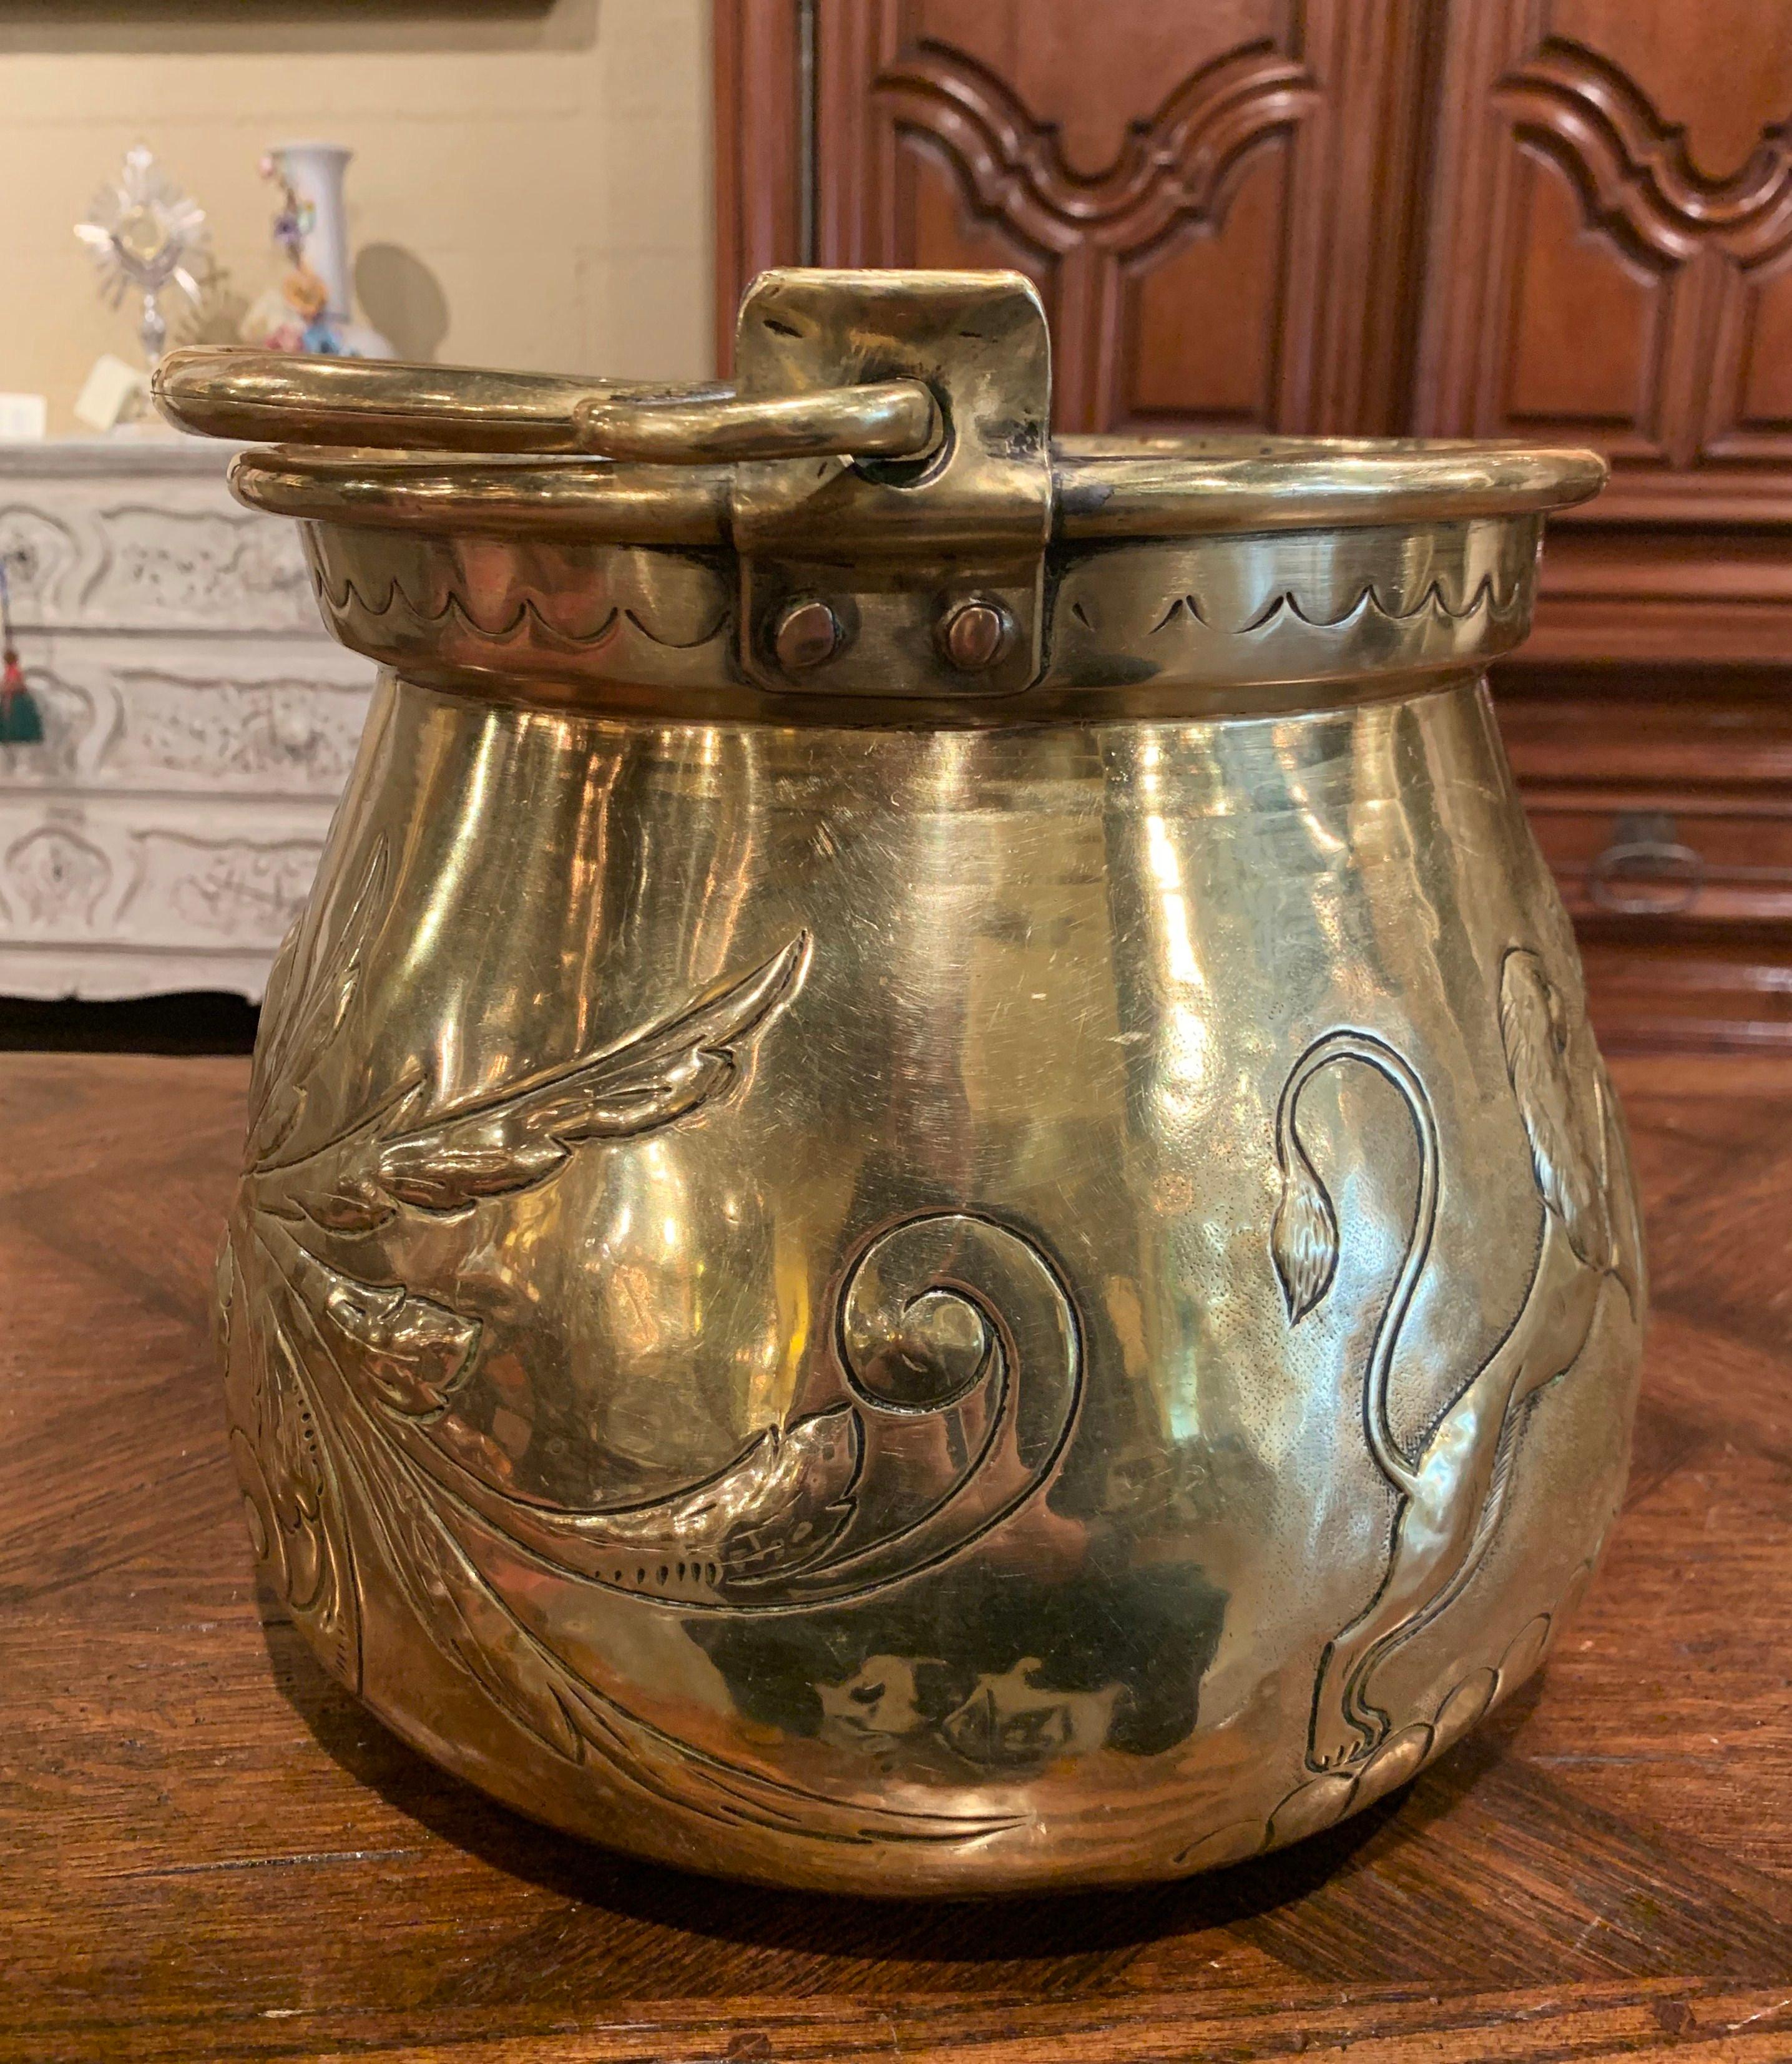 Late 17th Century French Louis XIV Brass Cauldron with Fleur de Lys and Crest 1